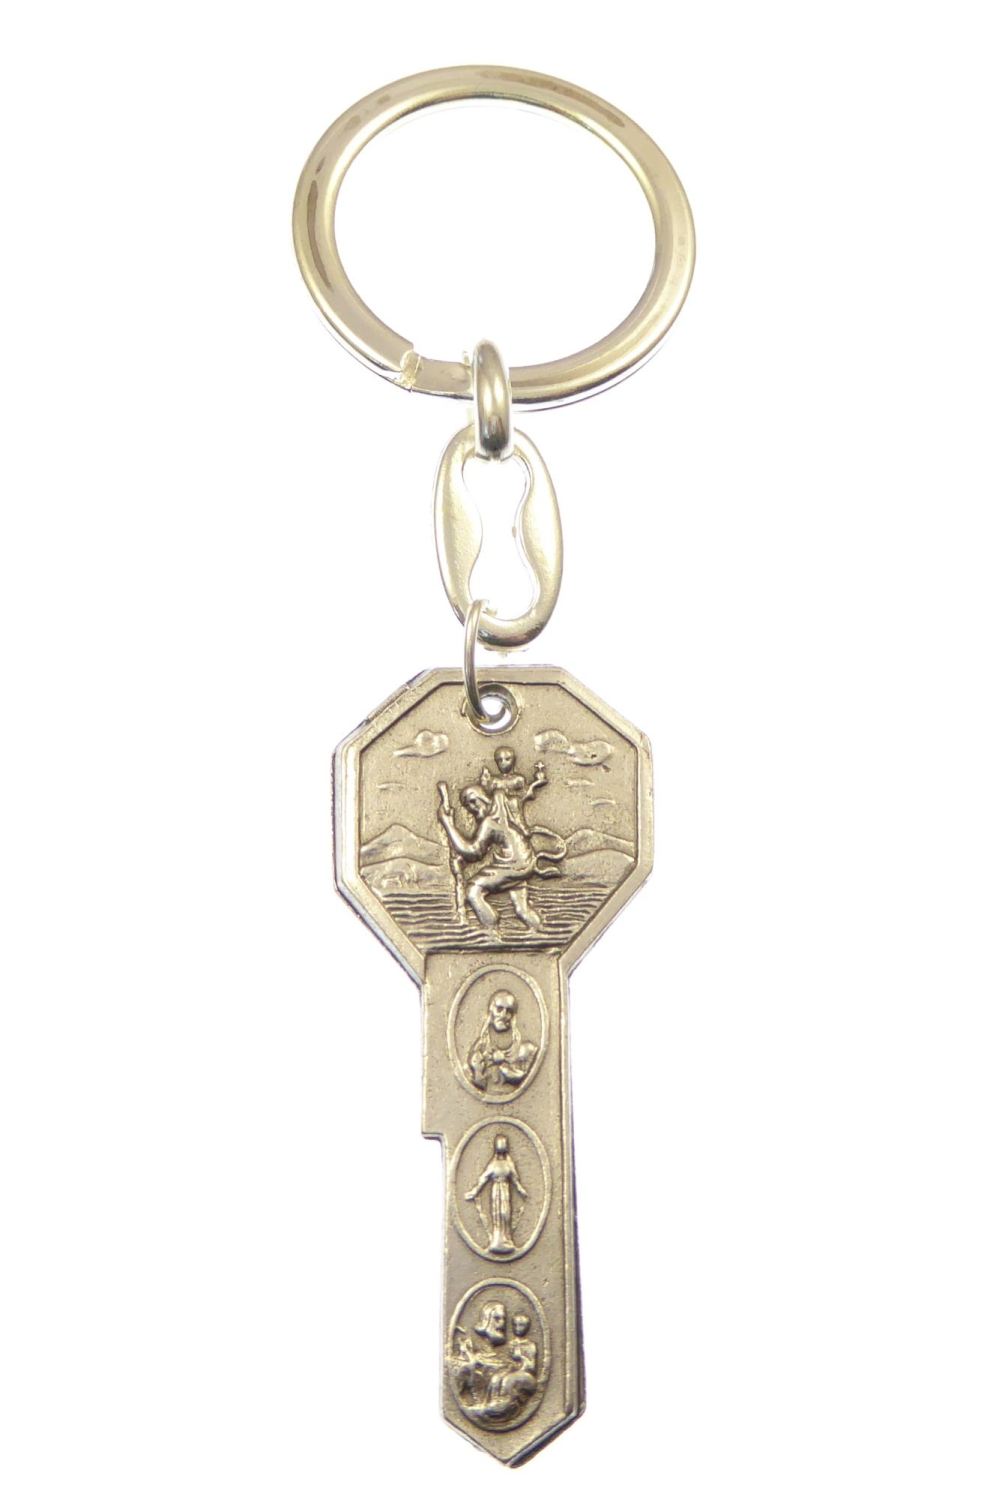 Keyring with Catholic images in key shape and silver metal